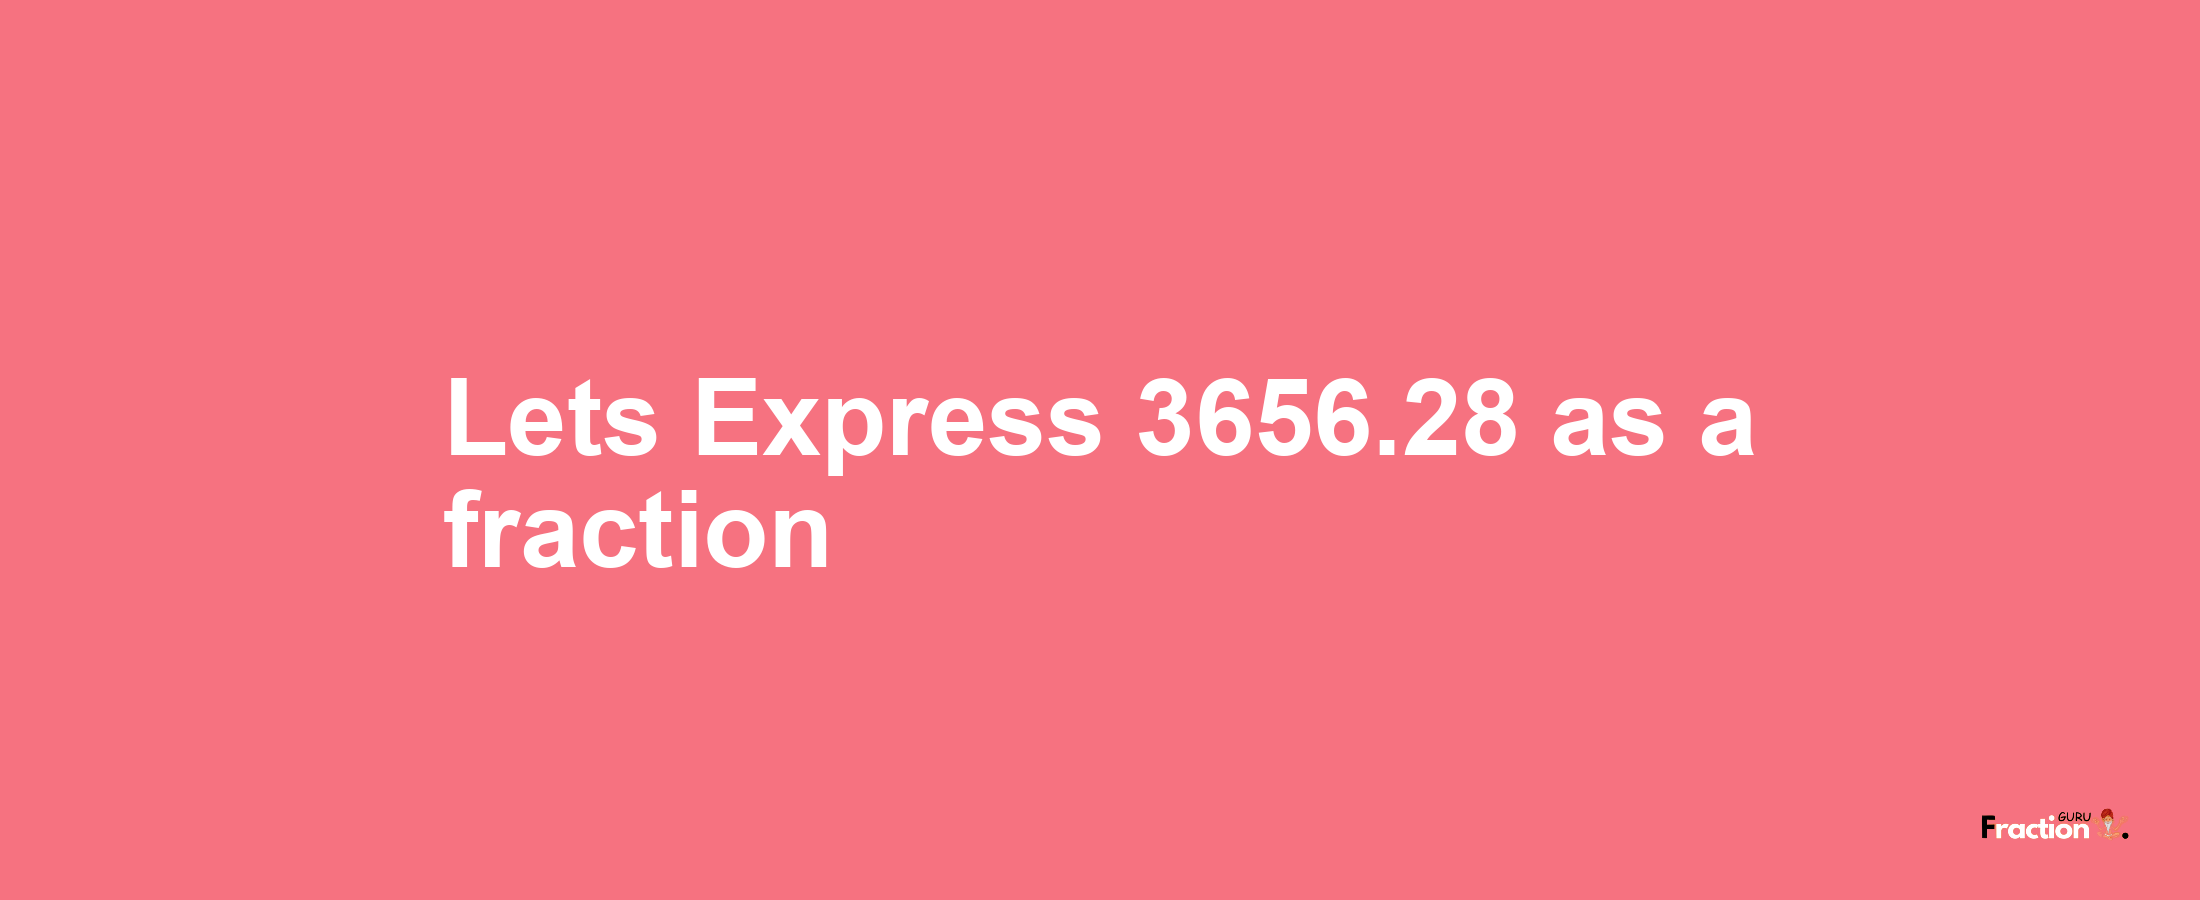 Lets Express 3656.28 as afraction